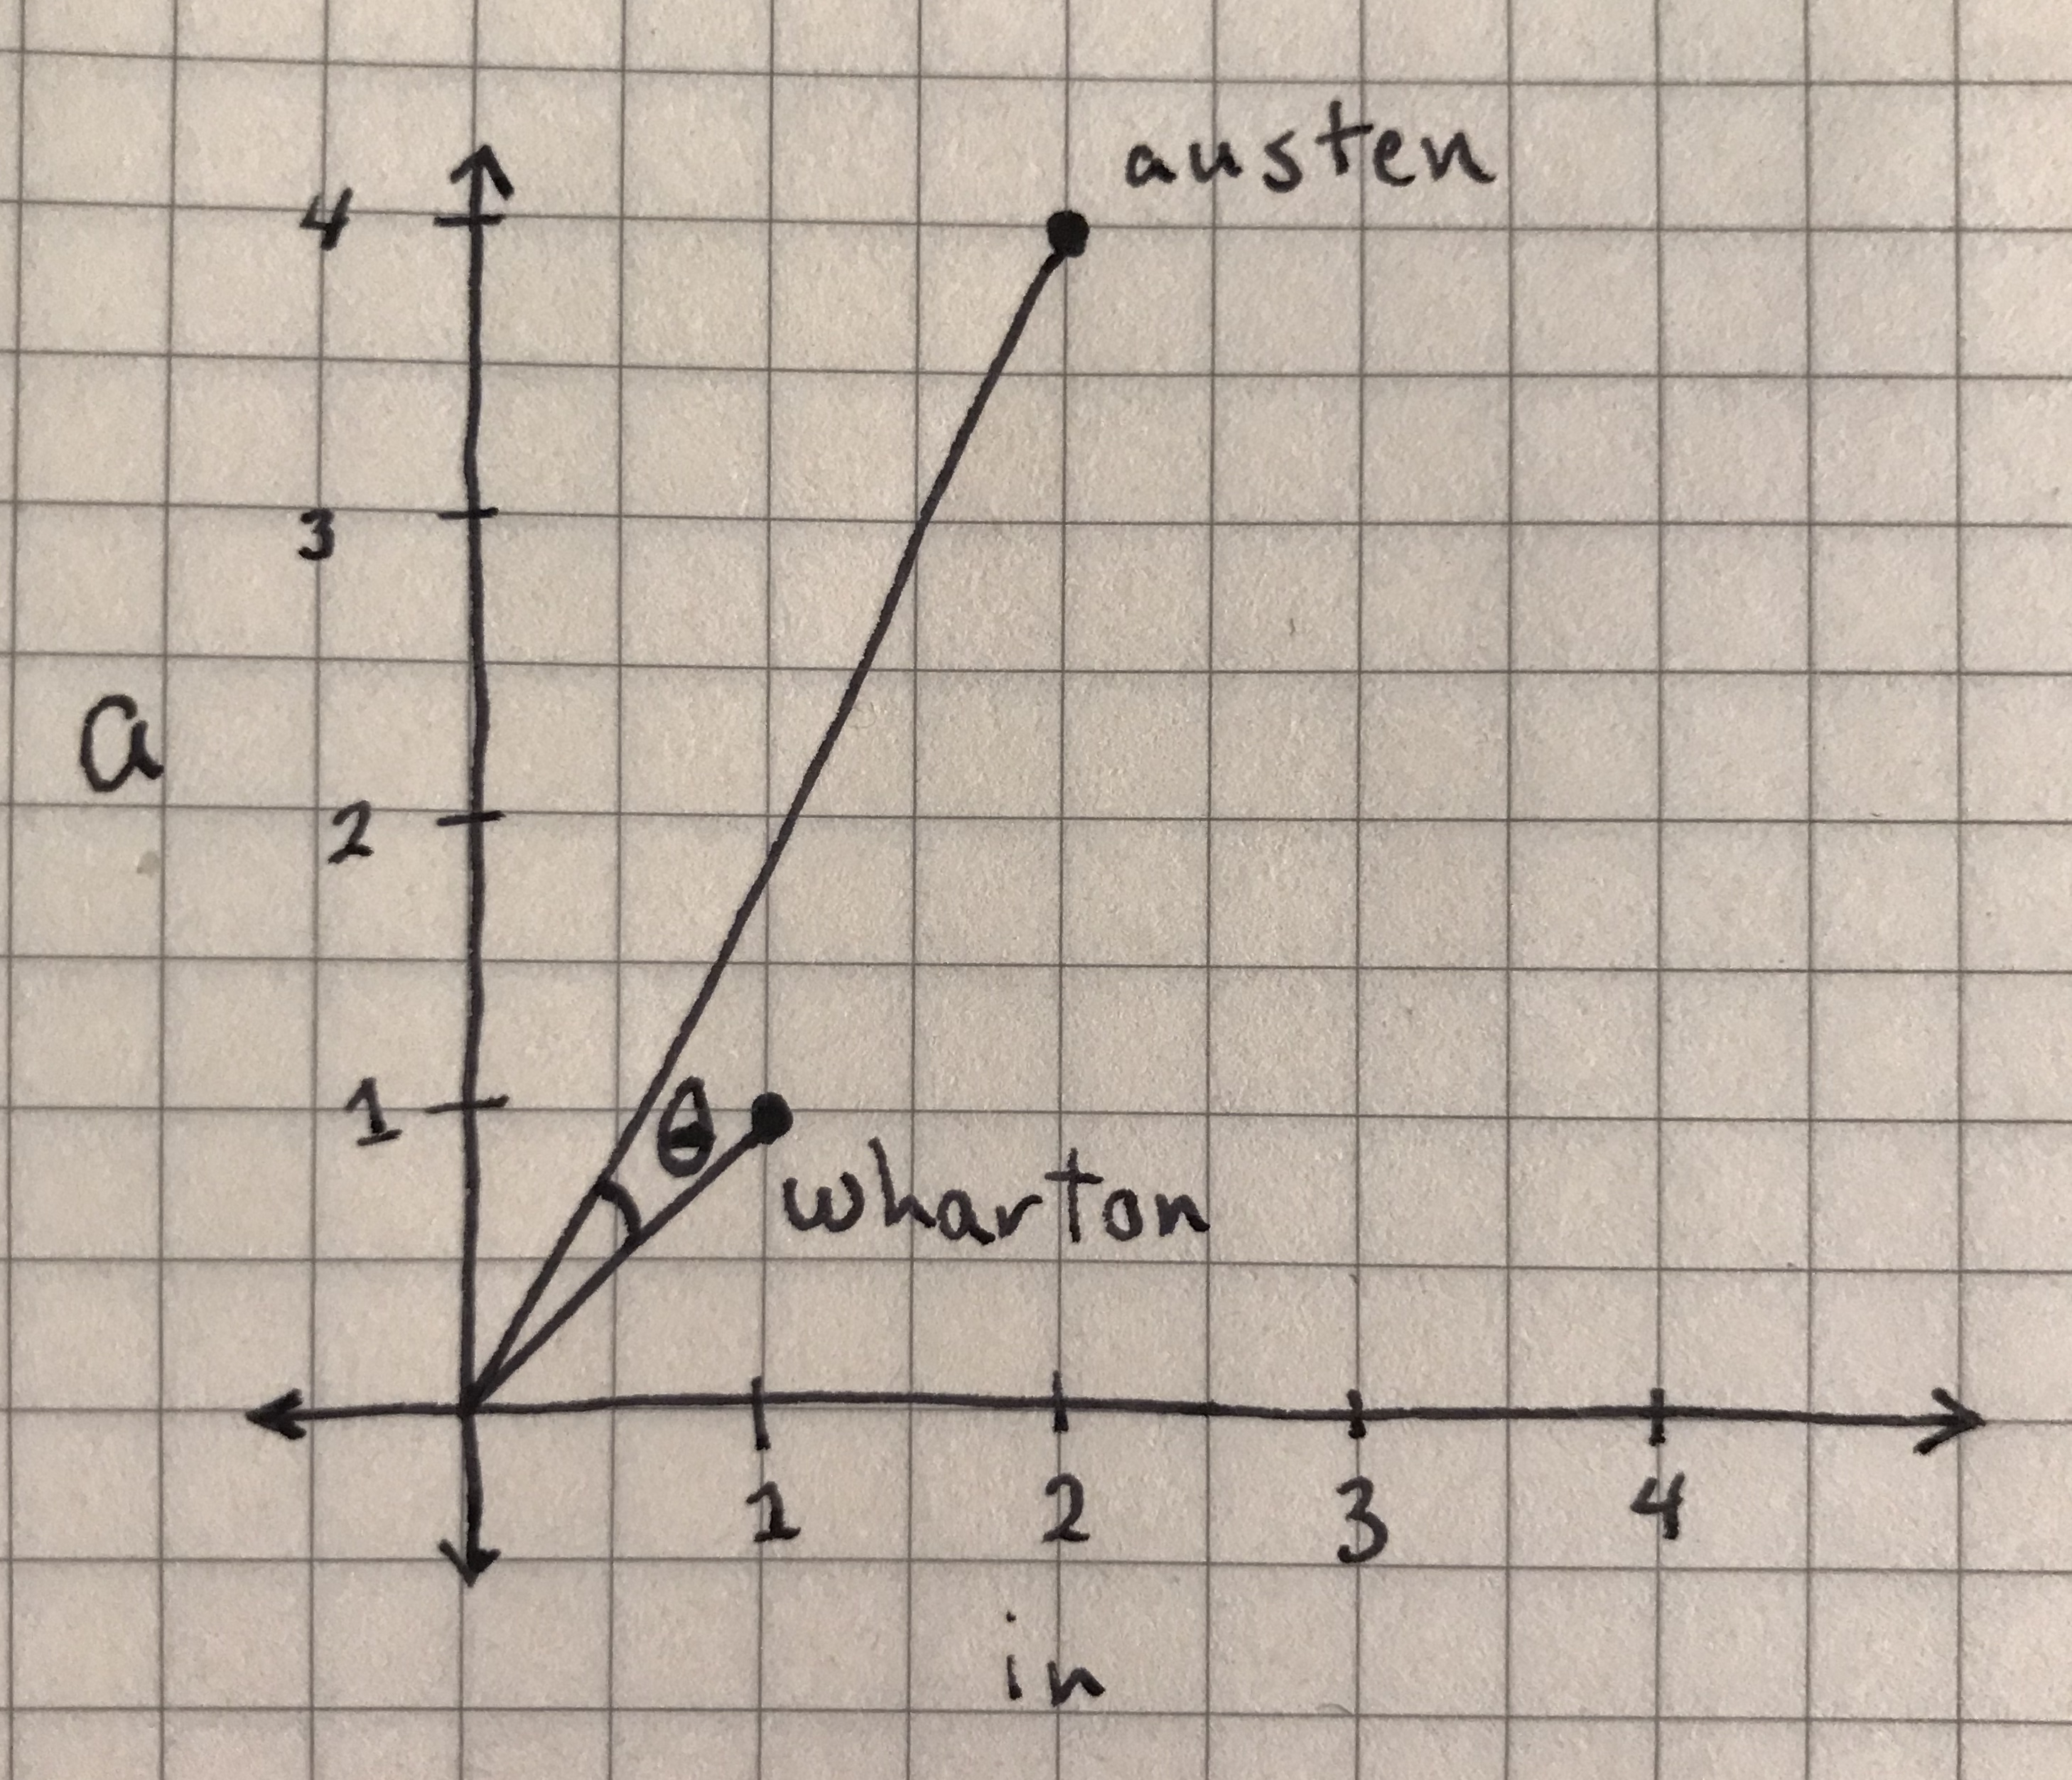 The angle between the 'austen' and 'wharton' data points, from which you will take the cosine.